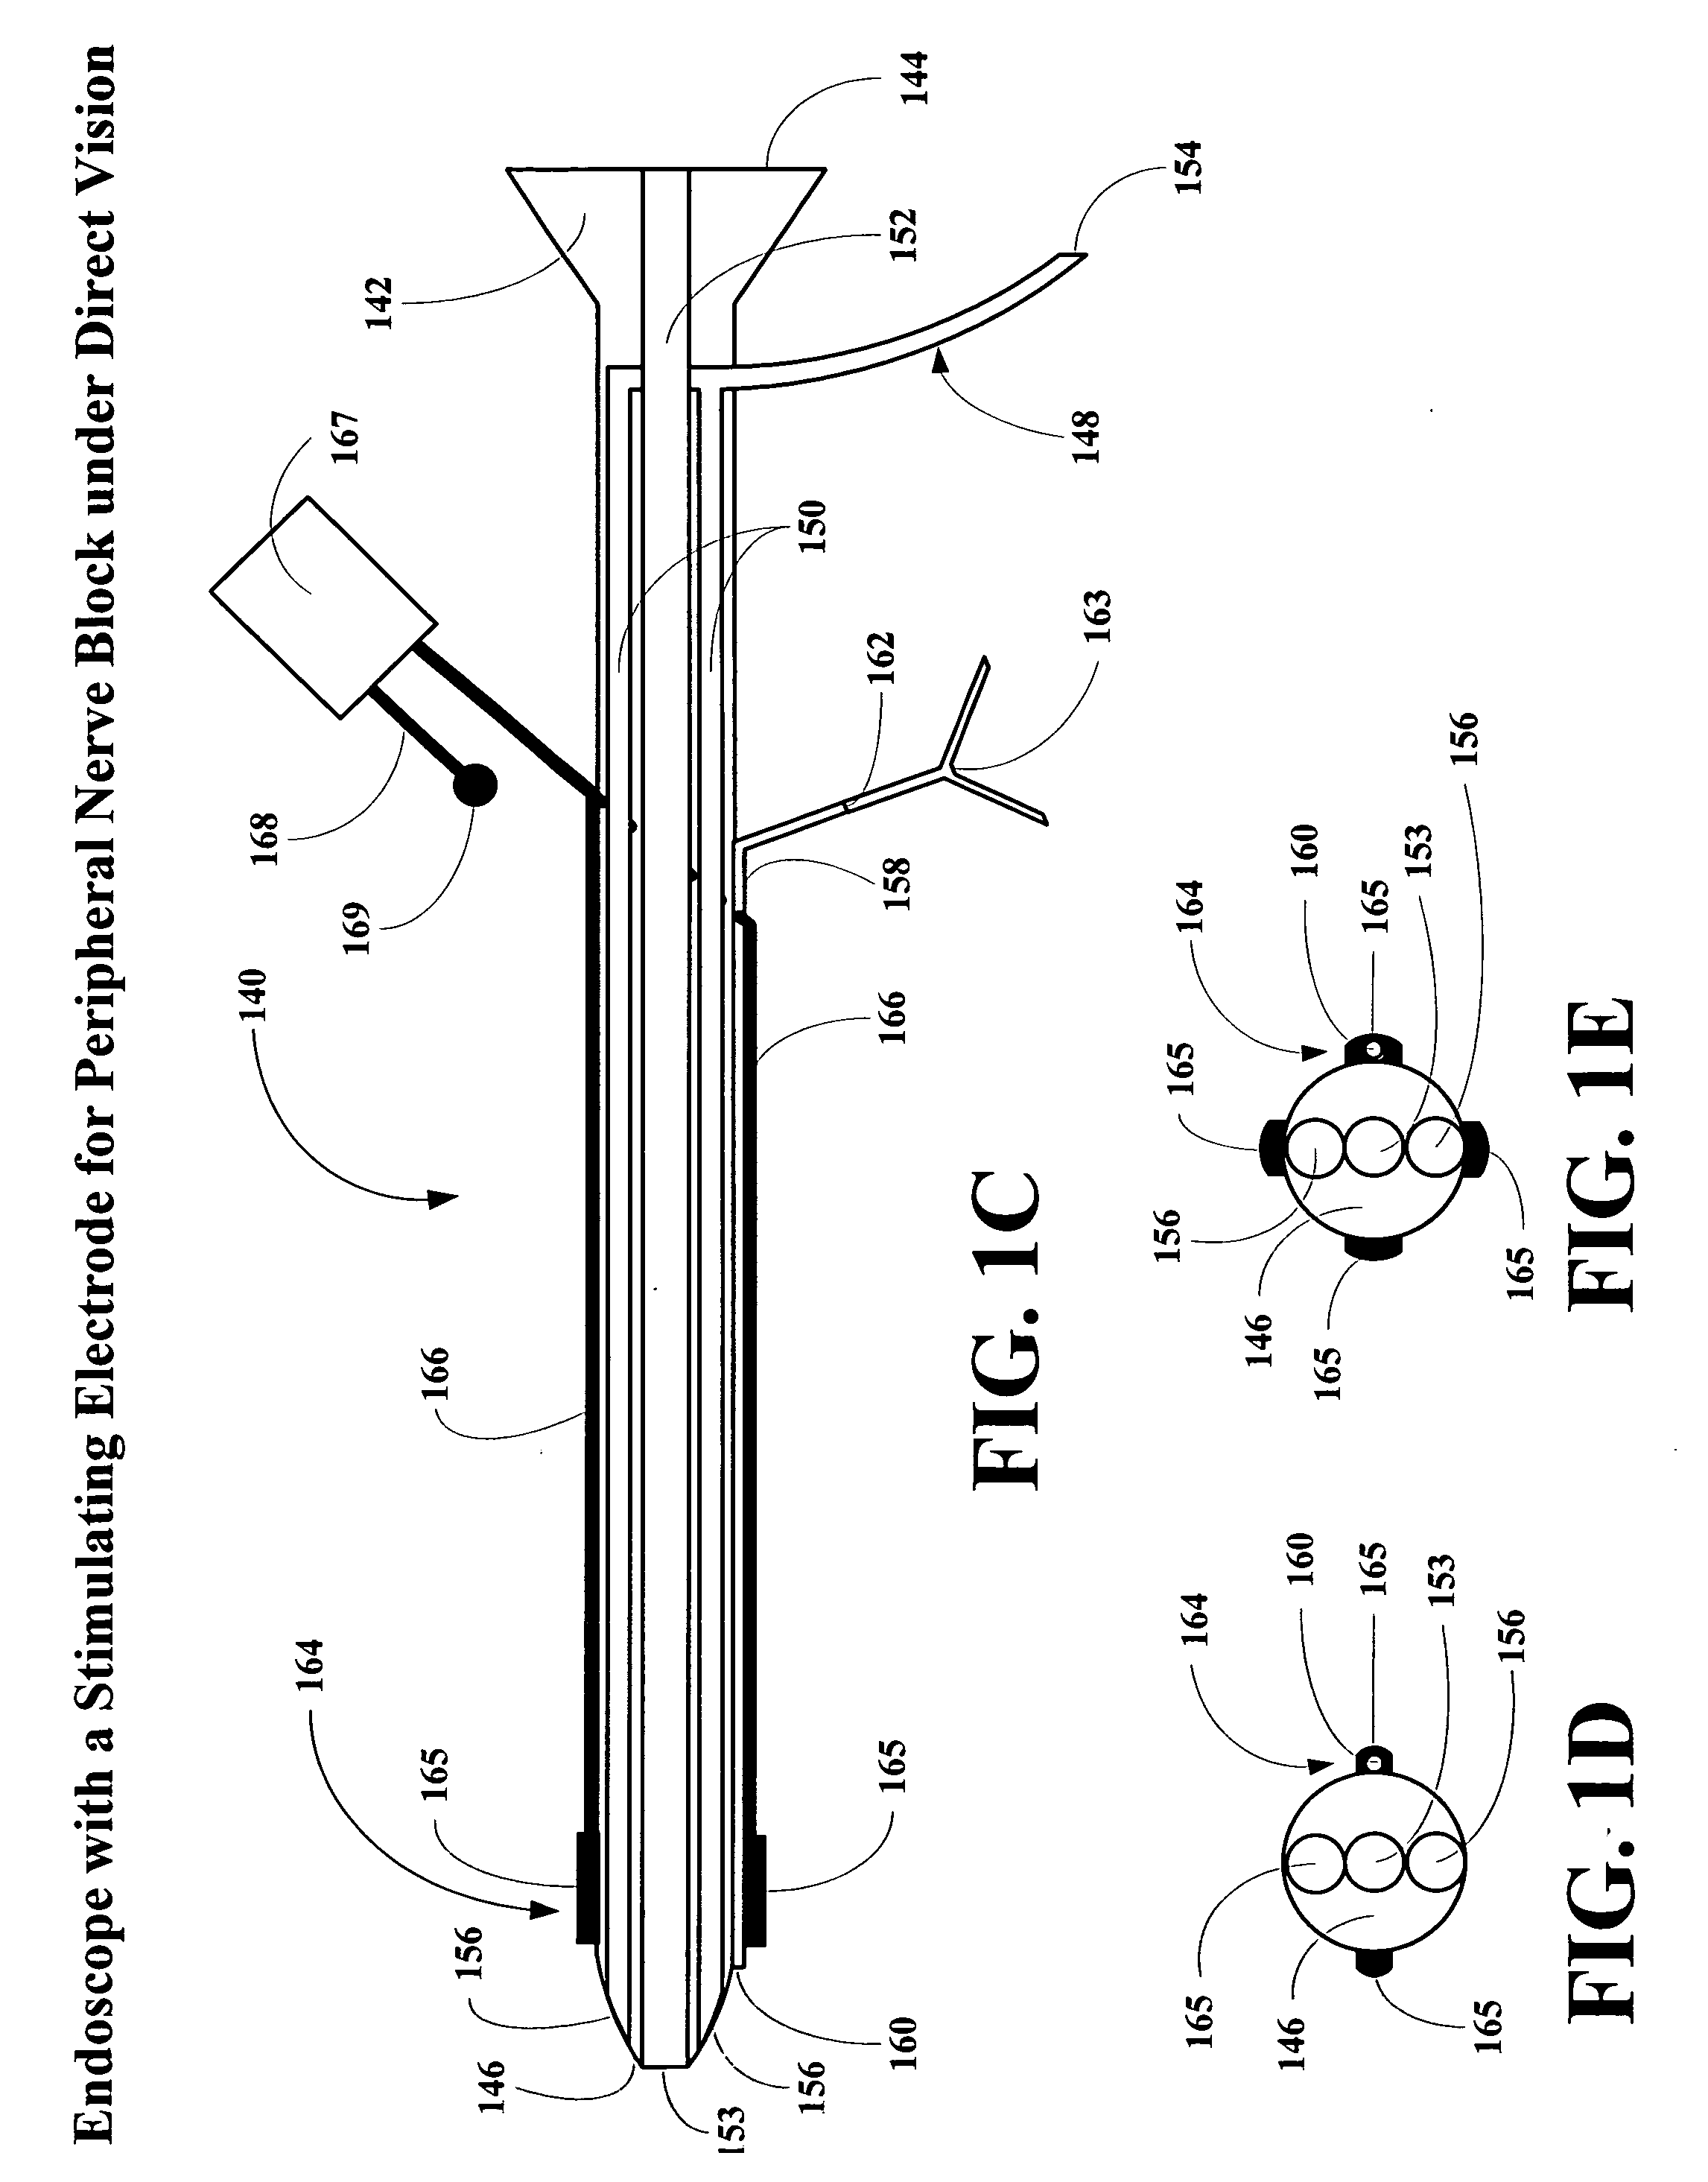 Endoscope With a Stimulating Electrode For Peripheral Nerve Blocks Under Direct Vision